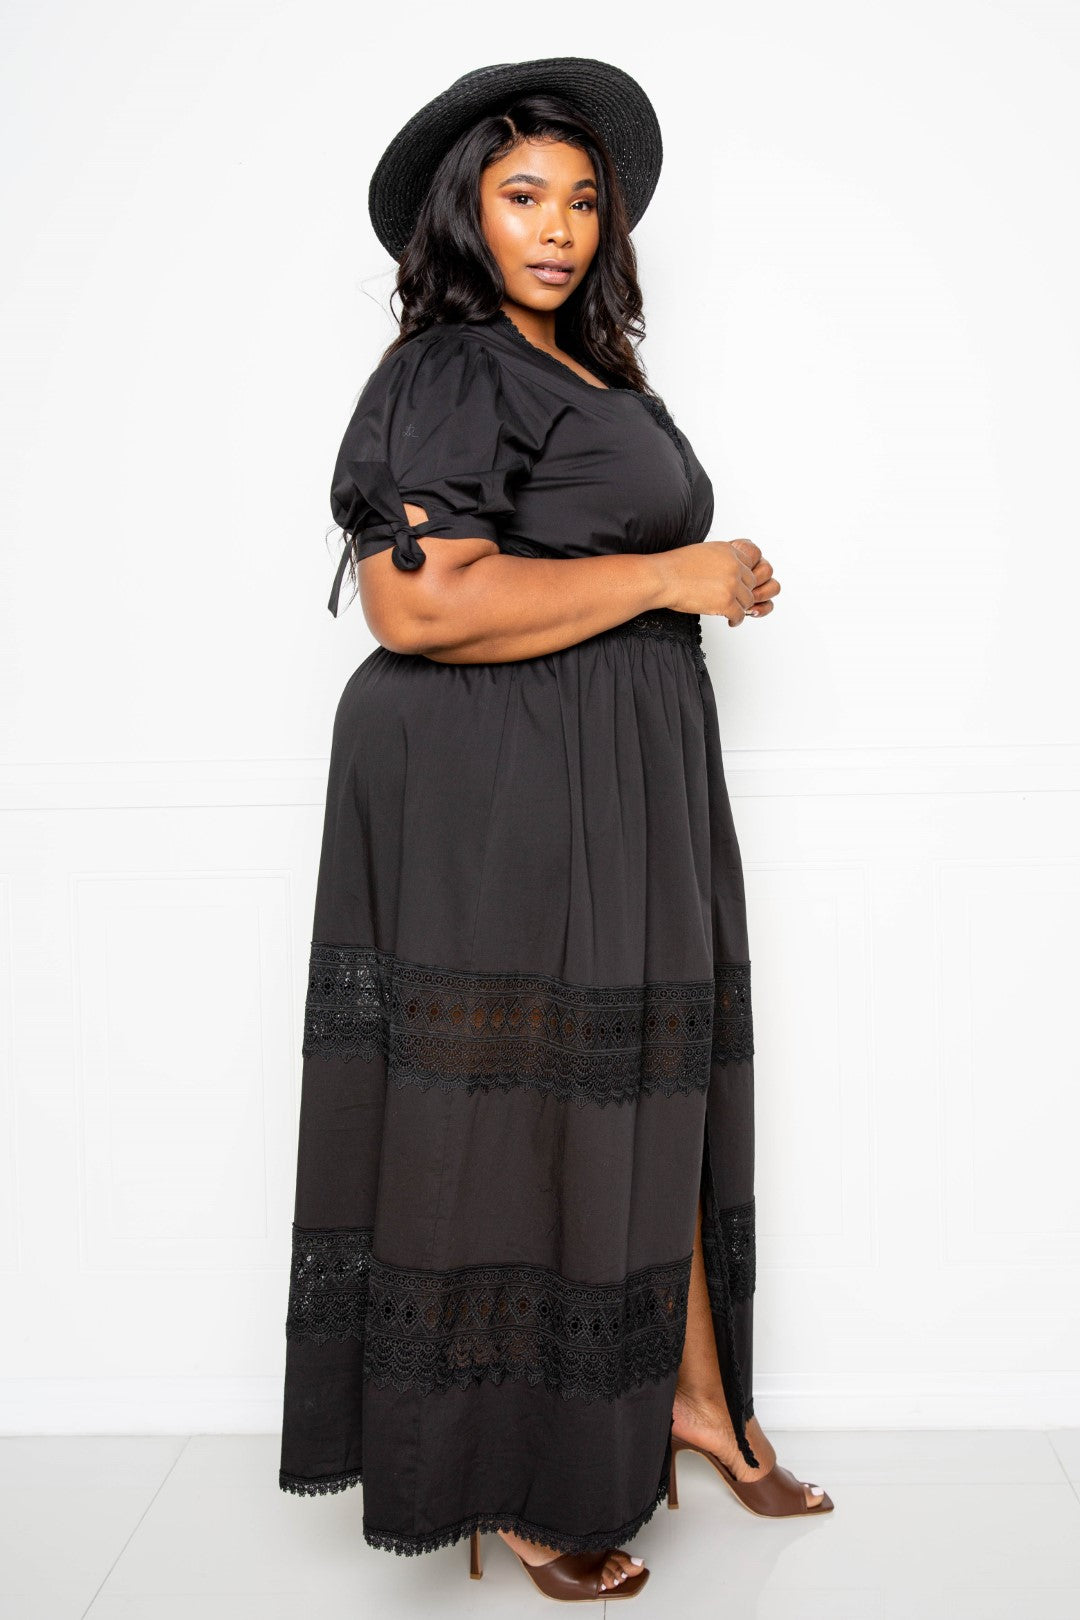 Puff Sleeve Maxi Dress With Lace Insert | Black, PLUS SIZE, PLUS SIZE DRESSES, SALE, SALE PLUS SIZE, White | Style Your Curves